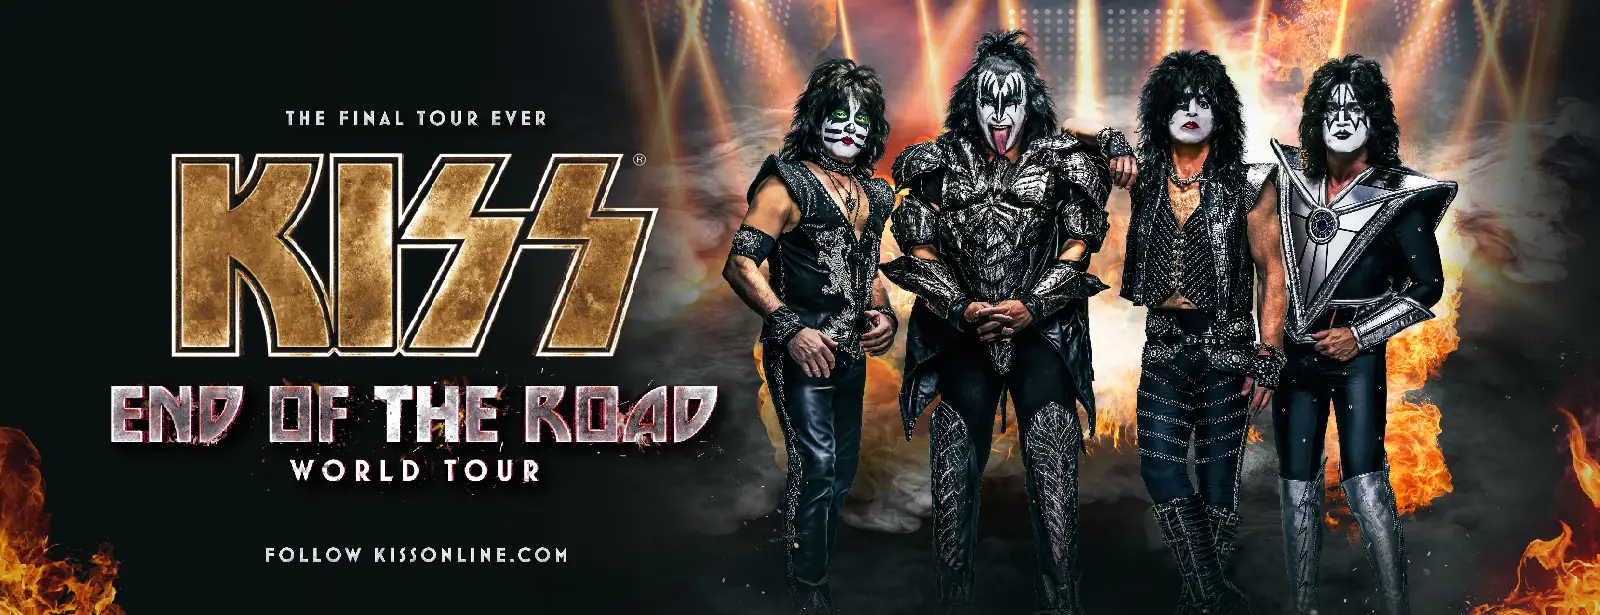 KISS - END OF THE ROAD